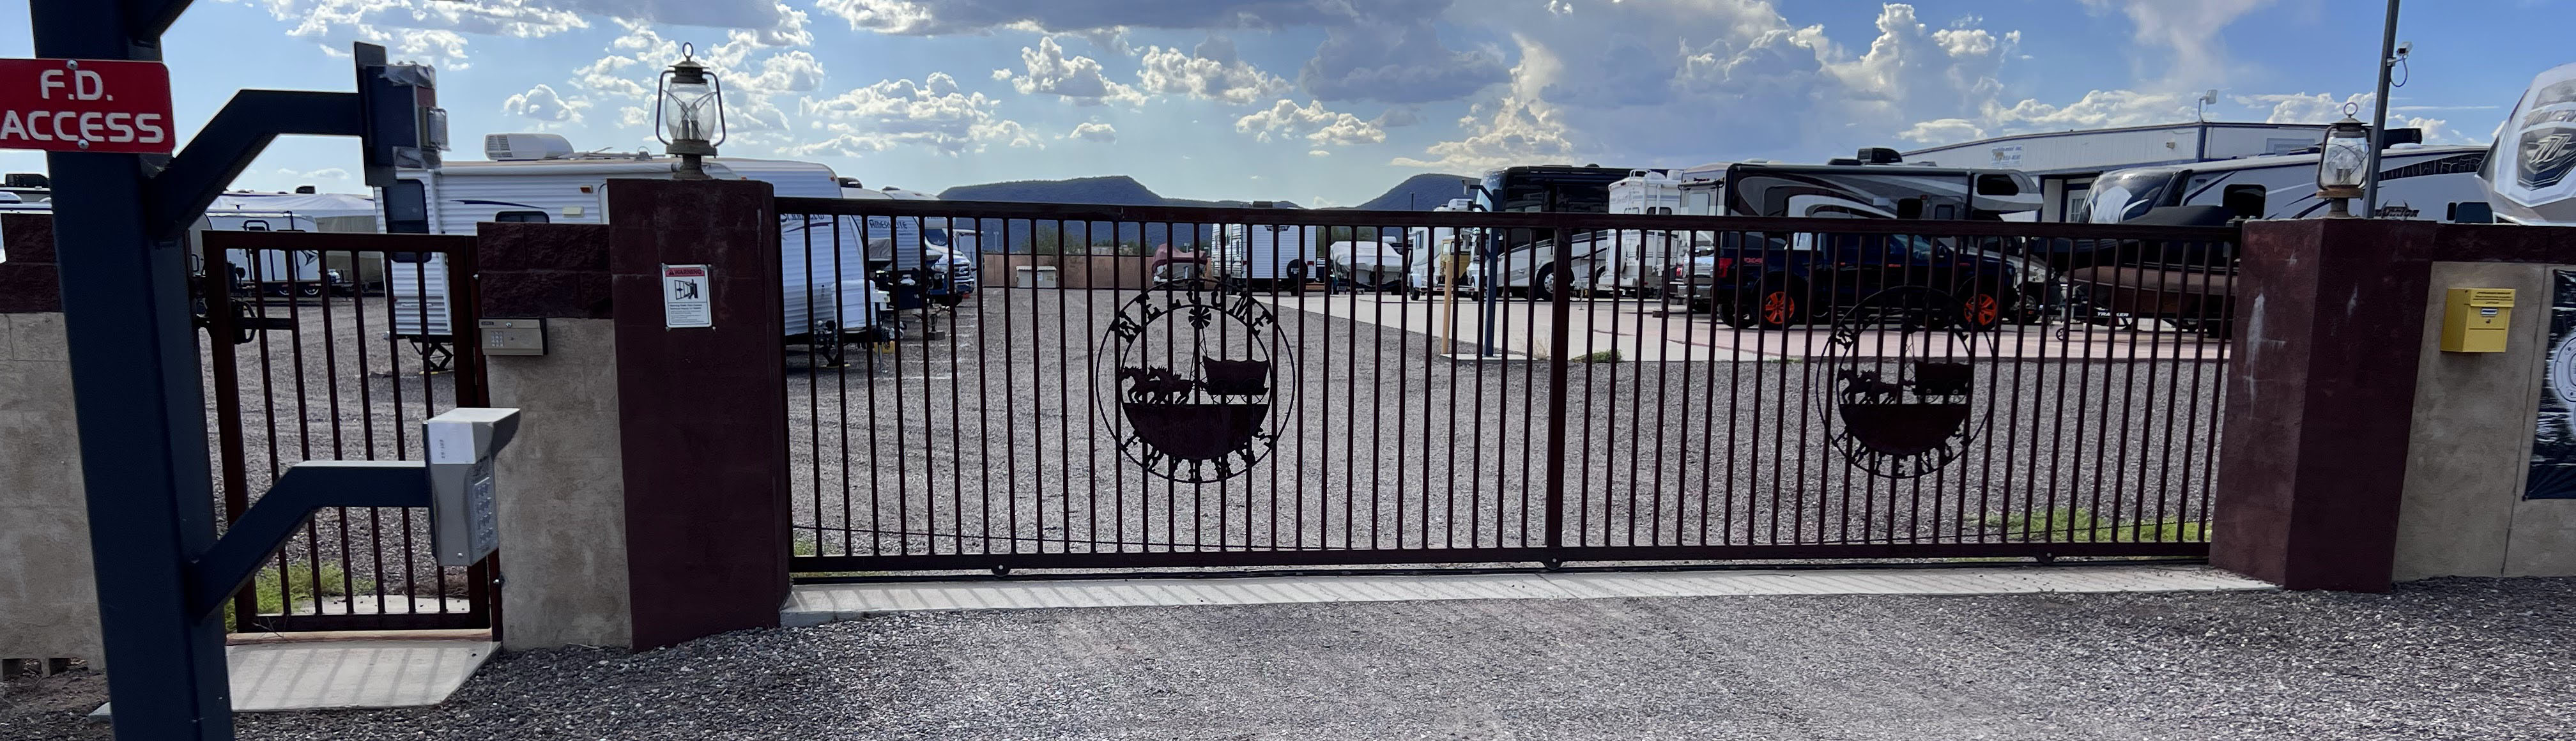 Fenced and Gated RV Storage in New River, AZ